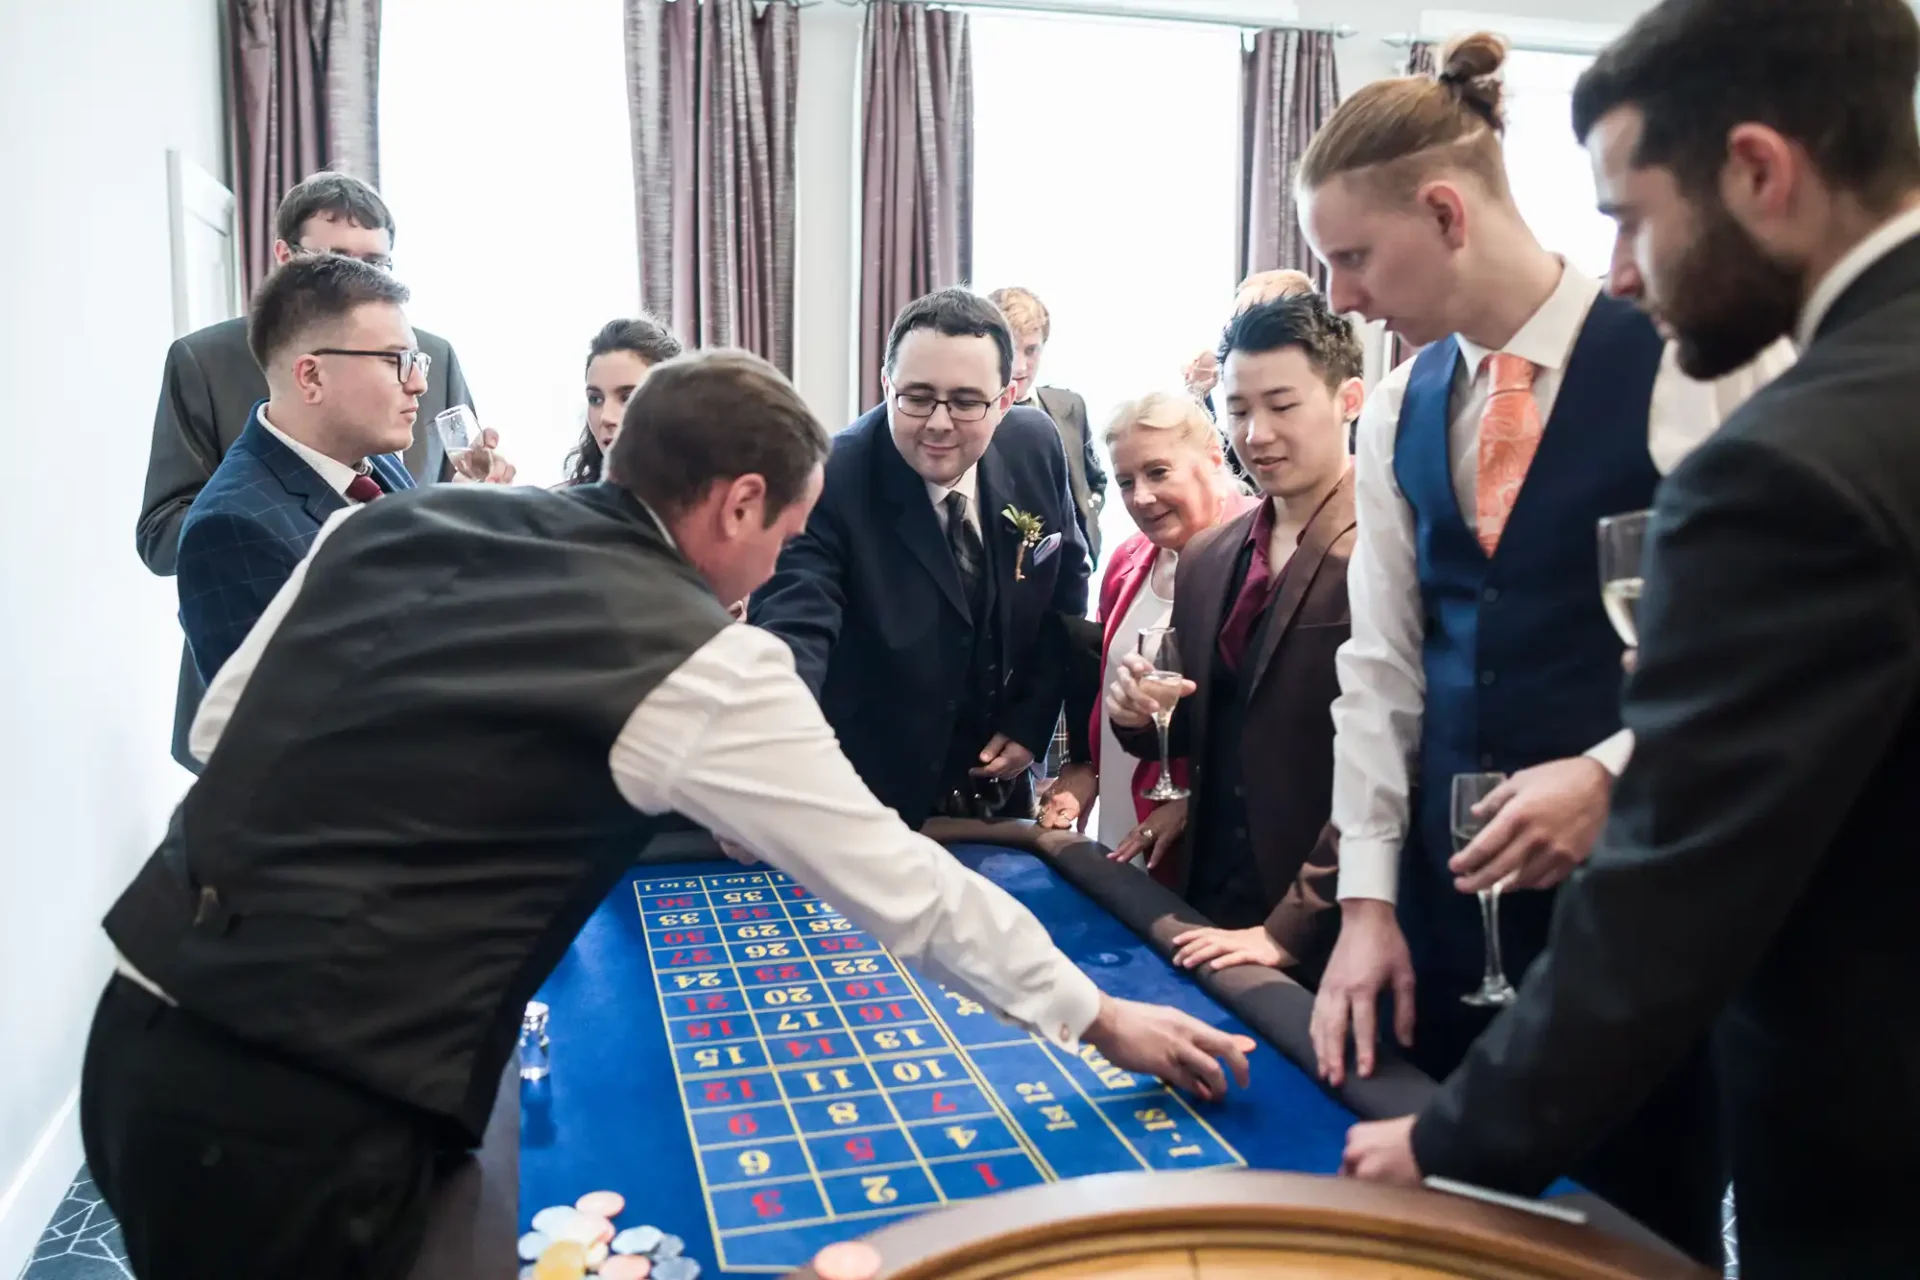 A group of people, including a man in a boutonniere, watching a dealer at a roulette table during an indoor event.